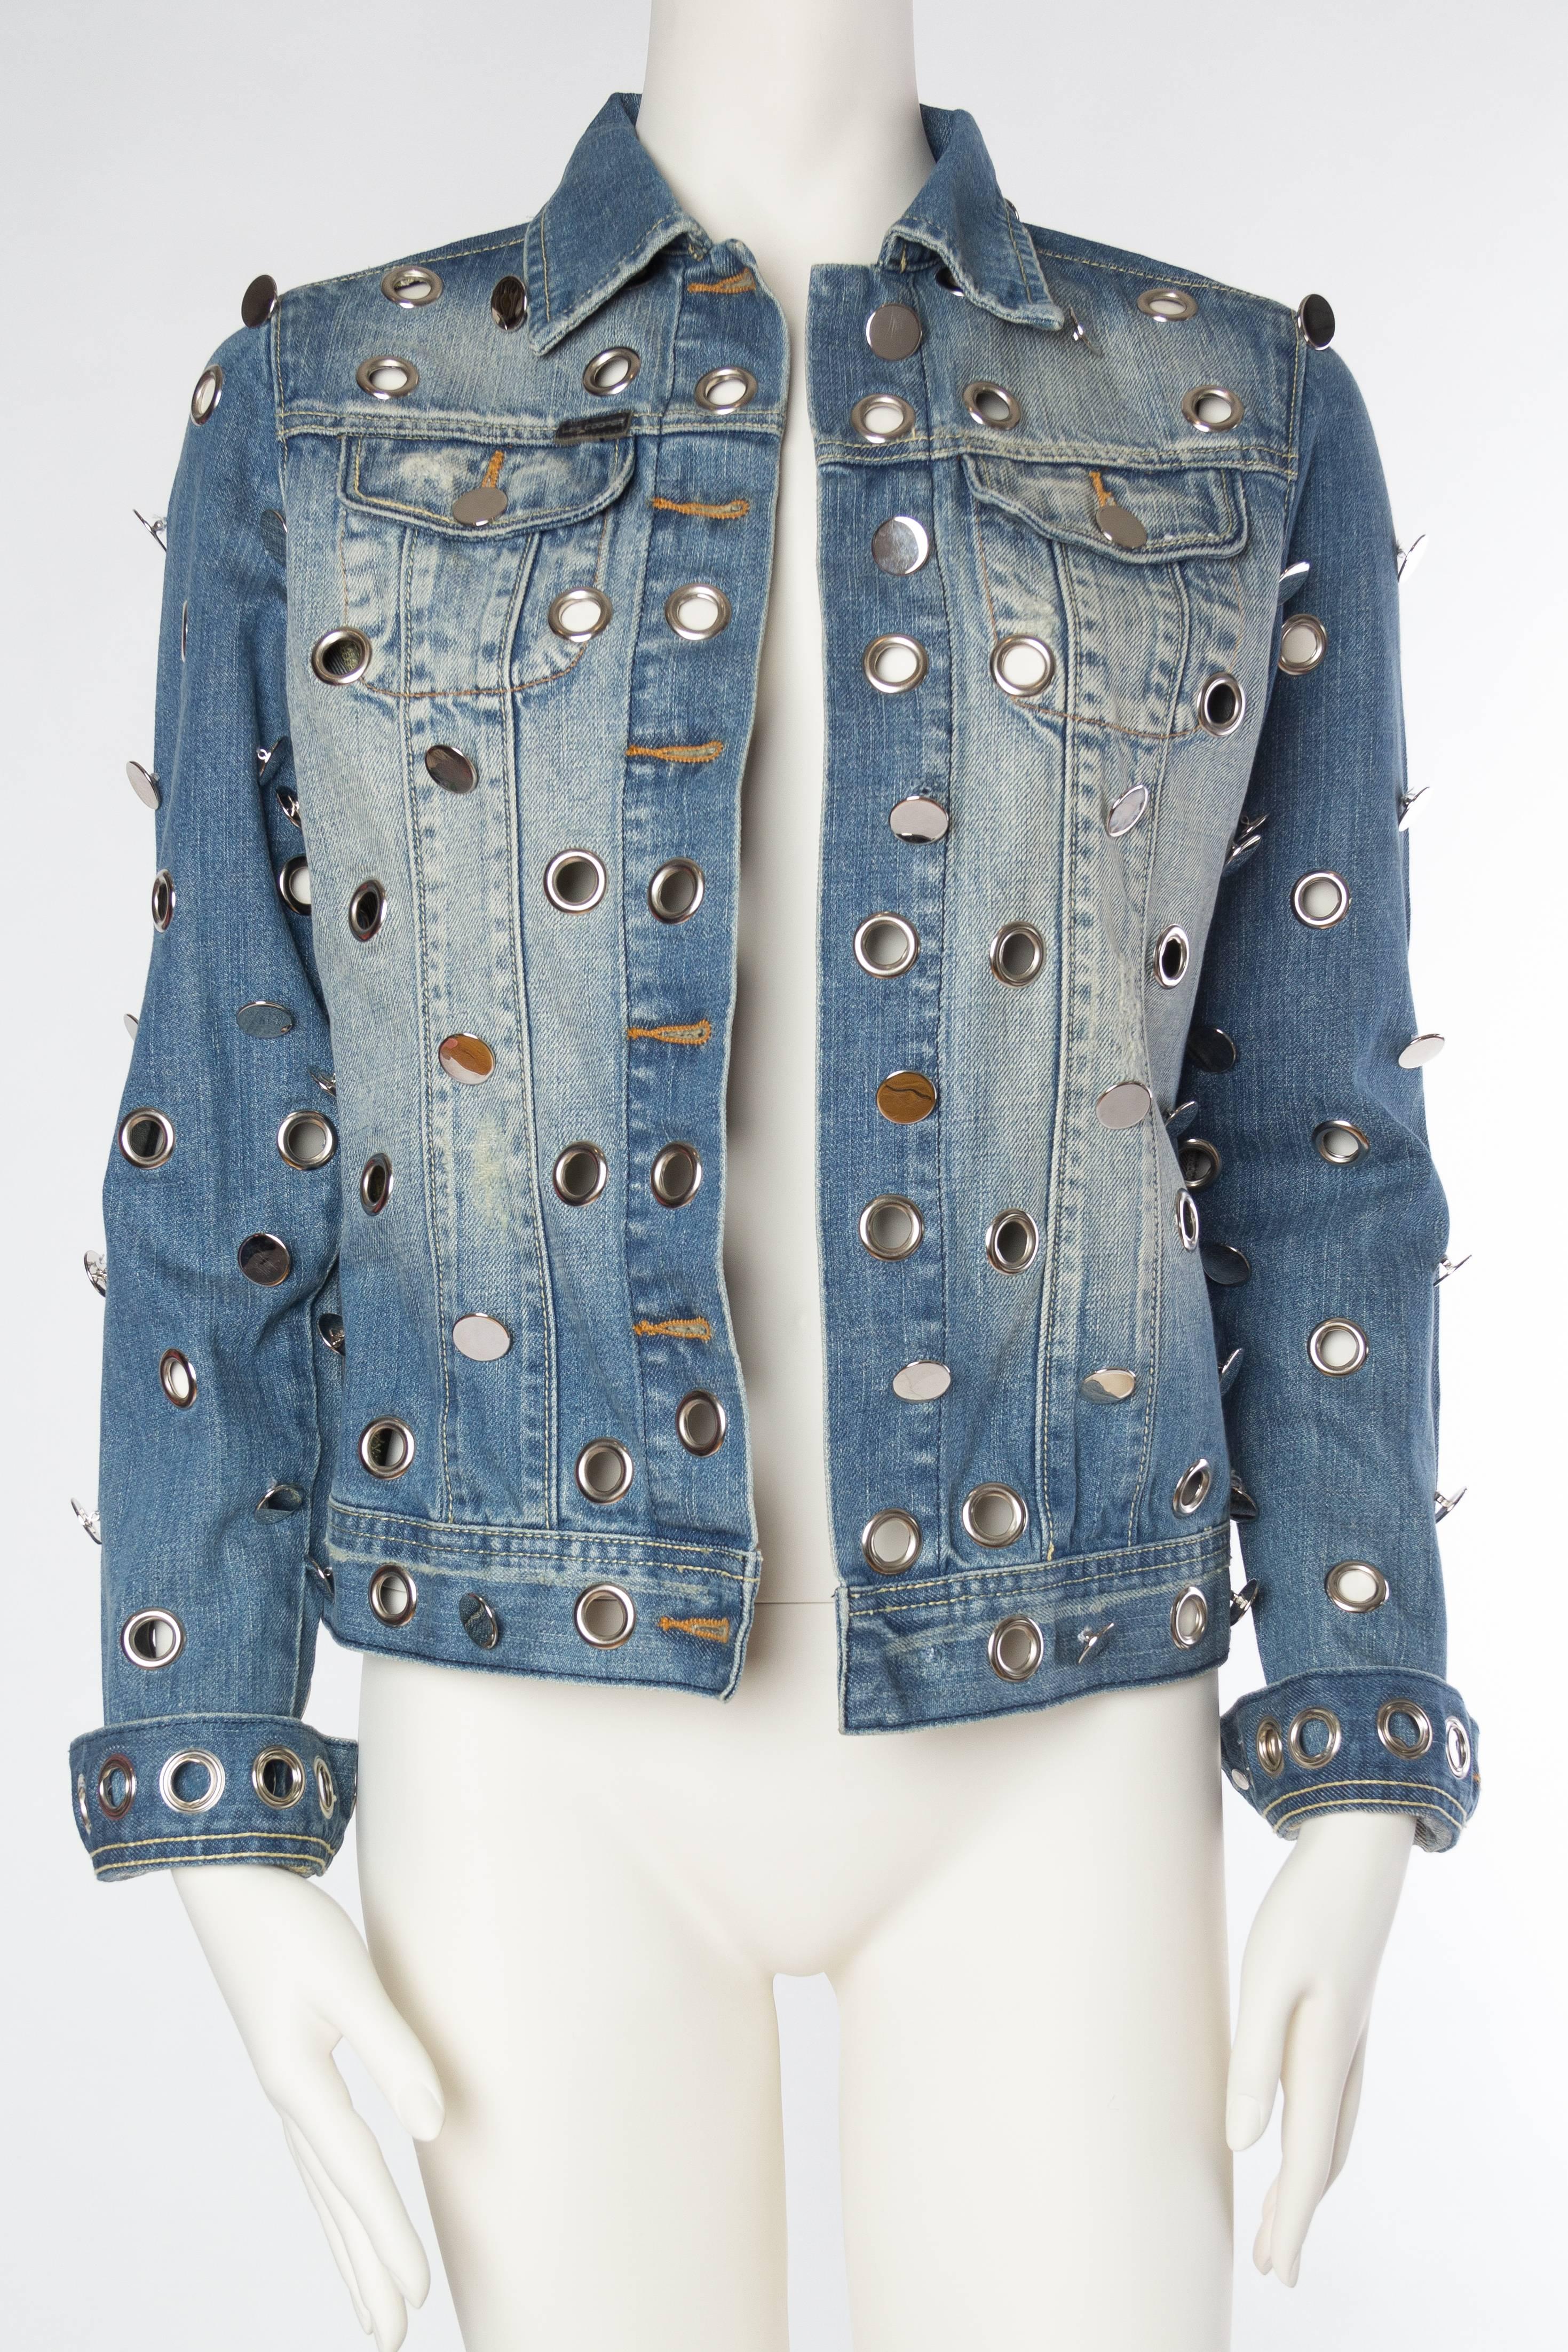 Gray Denim Jacket Covered in Mirrored Buttons and Gromets